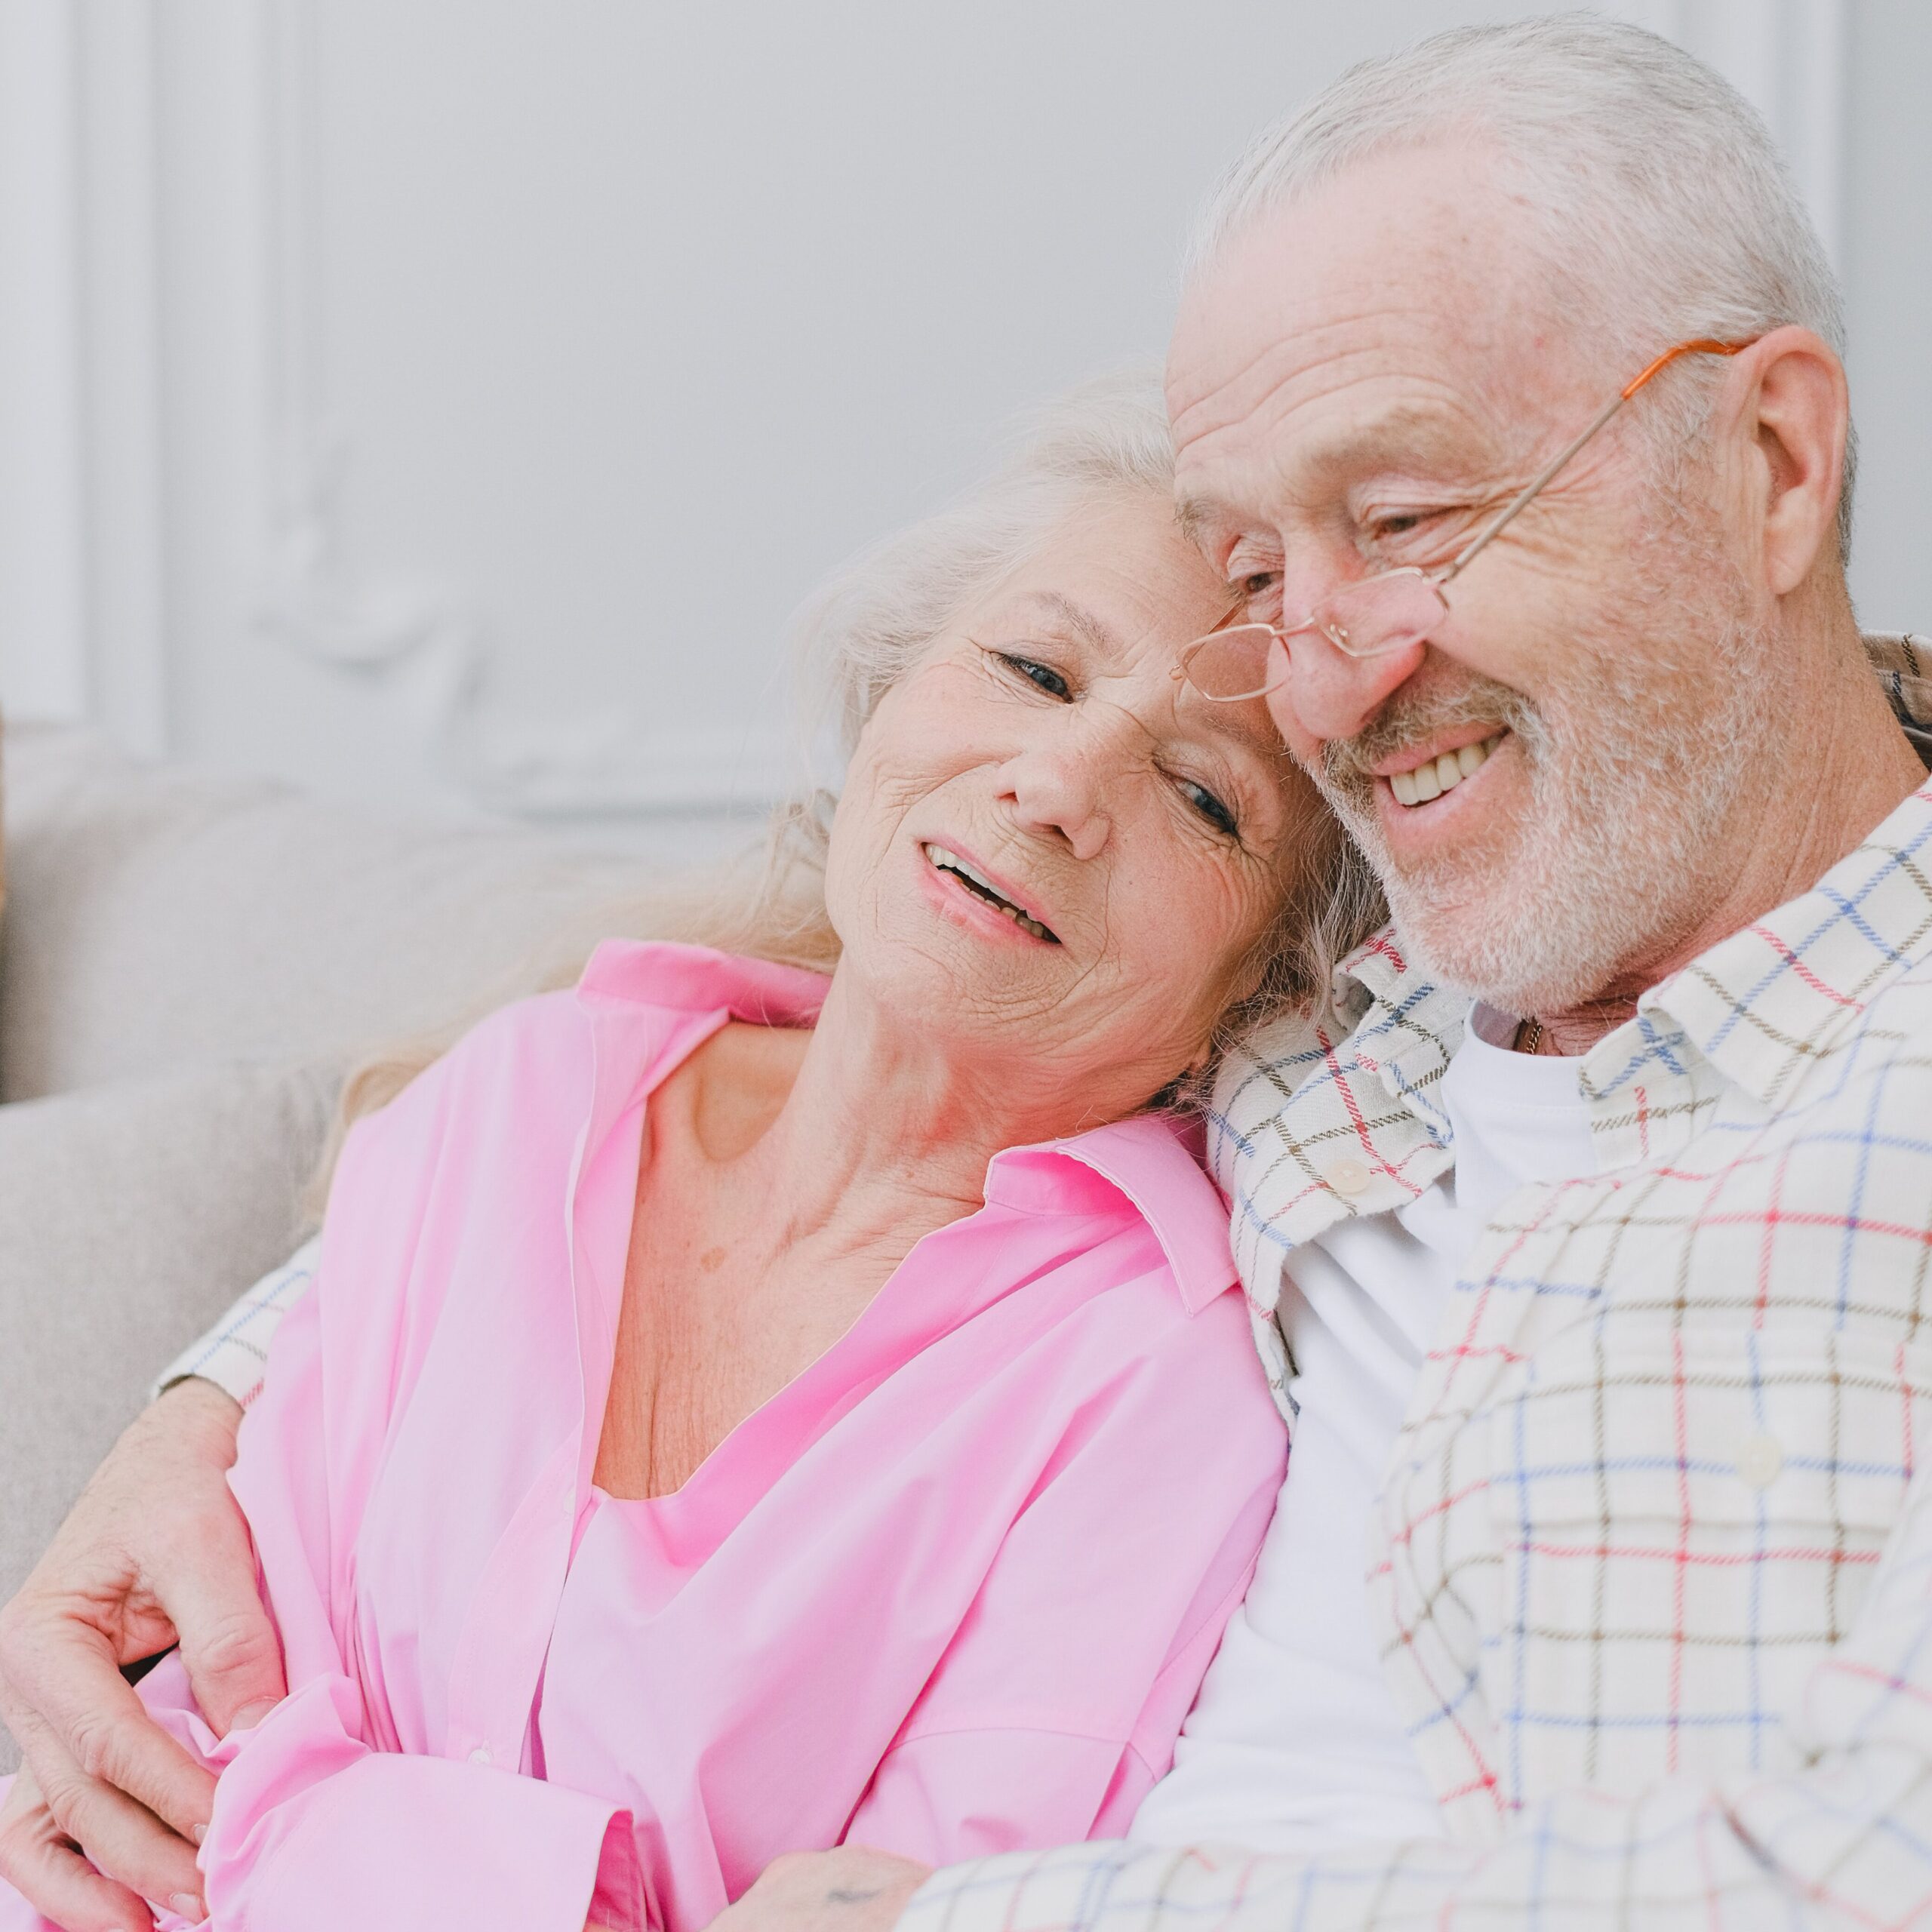 Photo by SHVETS production from Pexels: https://www.pexels.com/photo/photograph-of-an-elderly-couple-smiling-7545210/